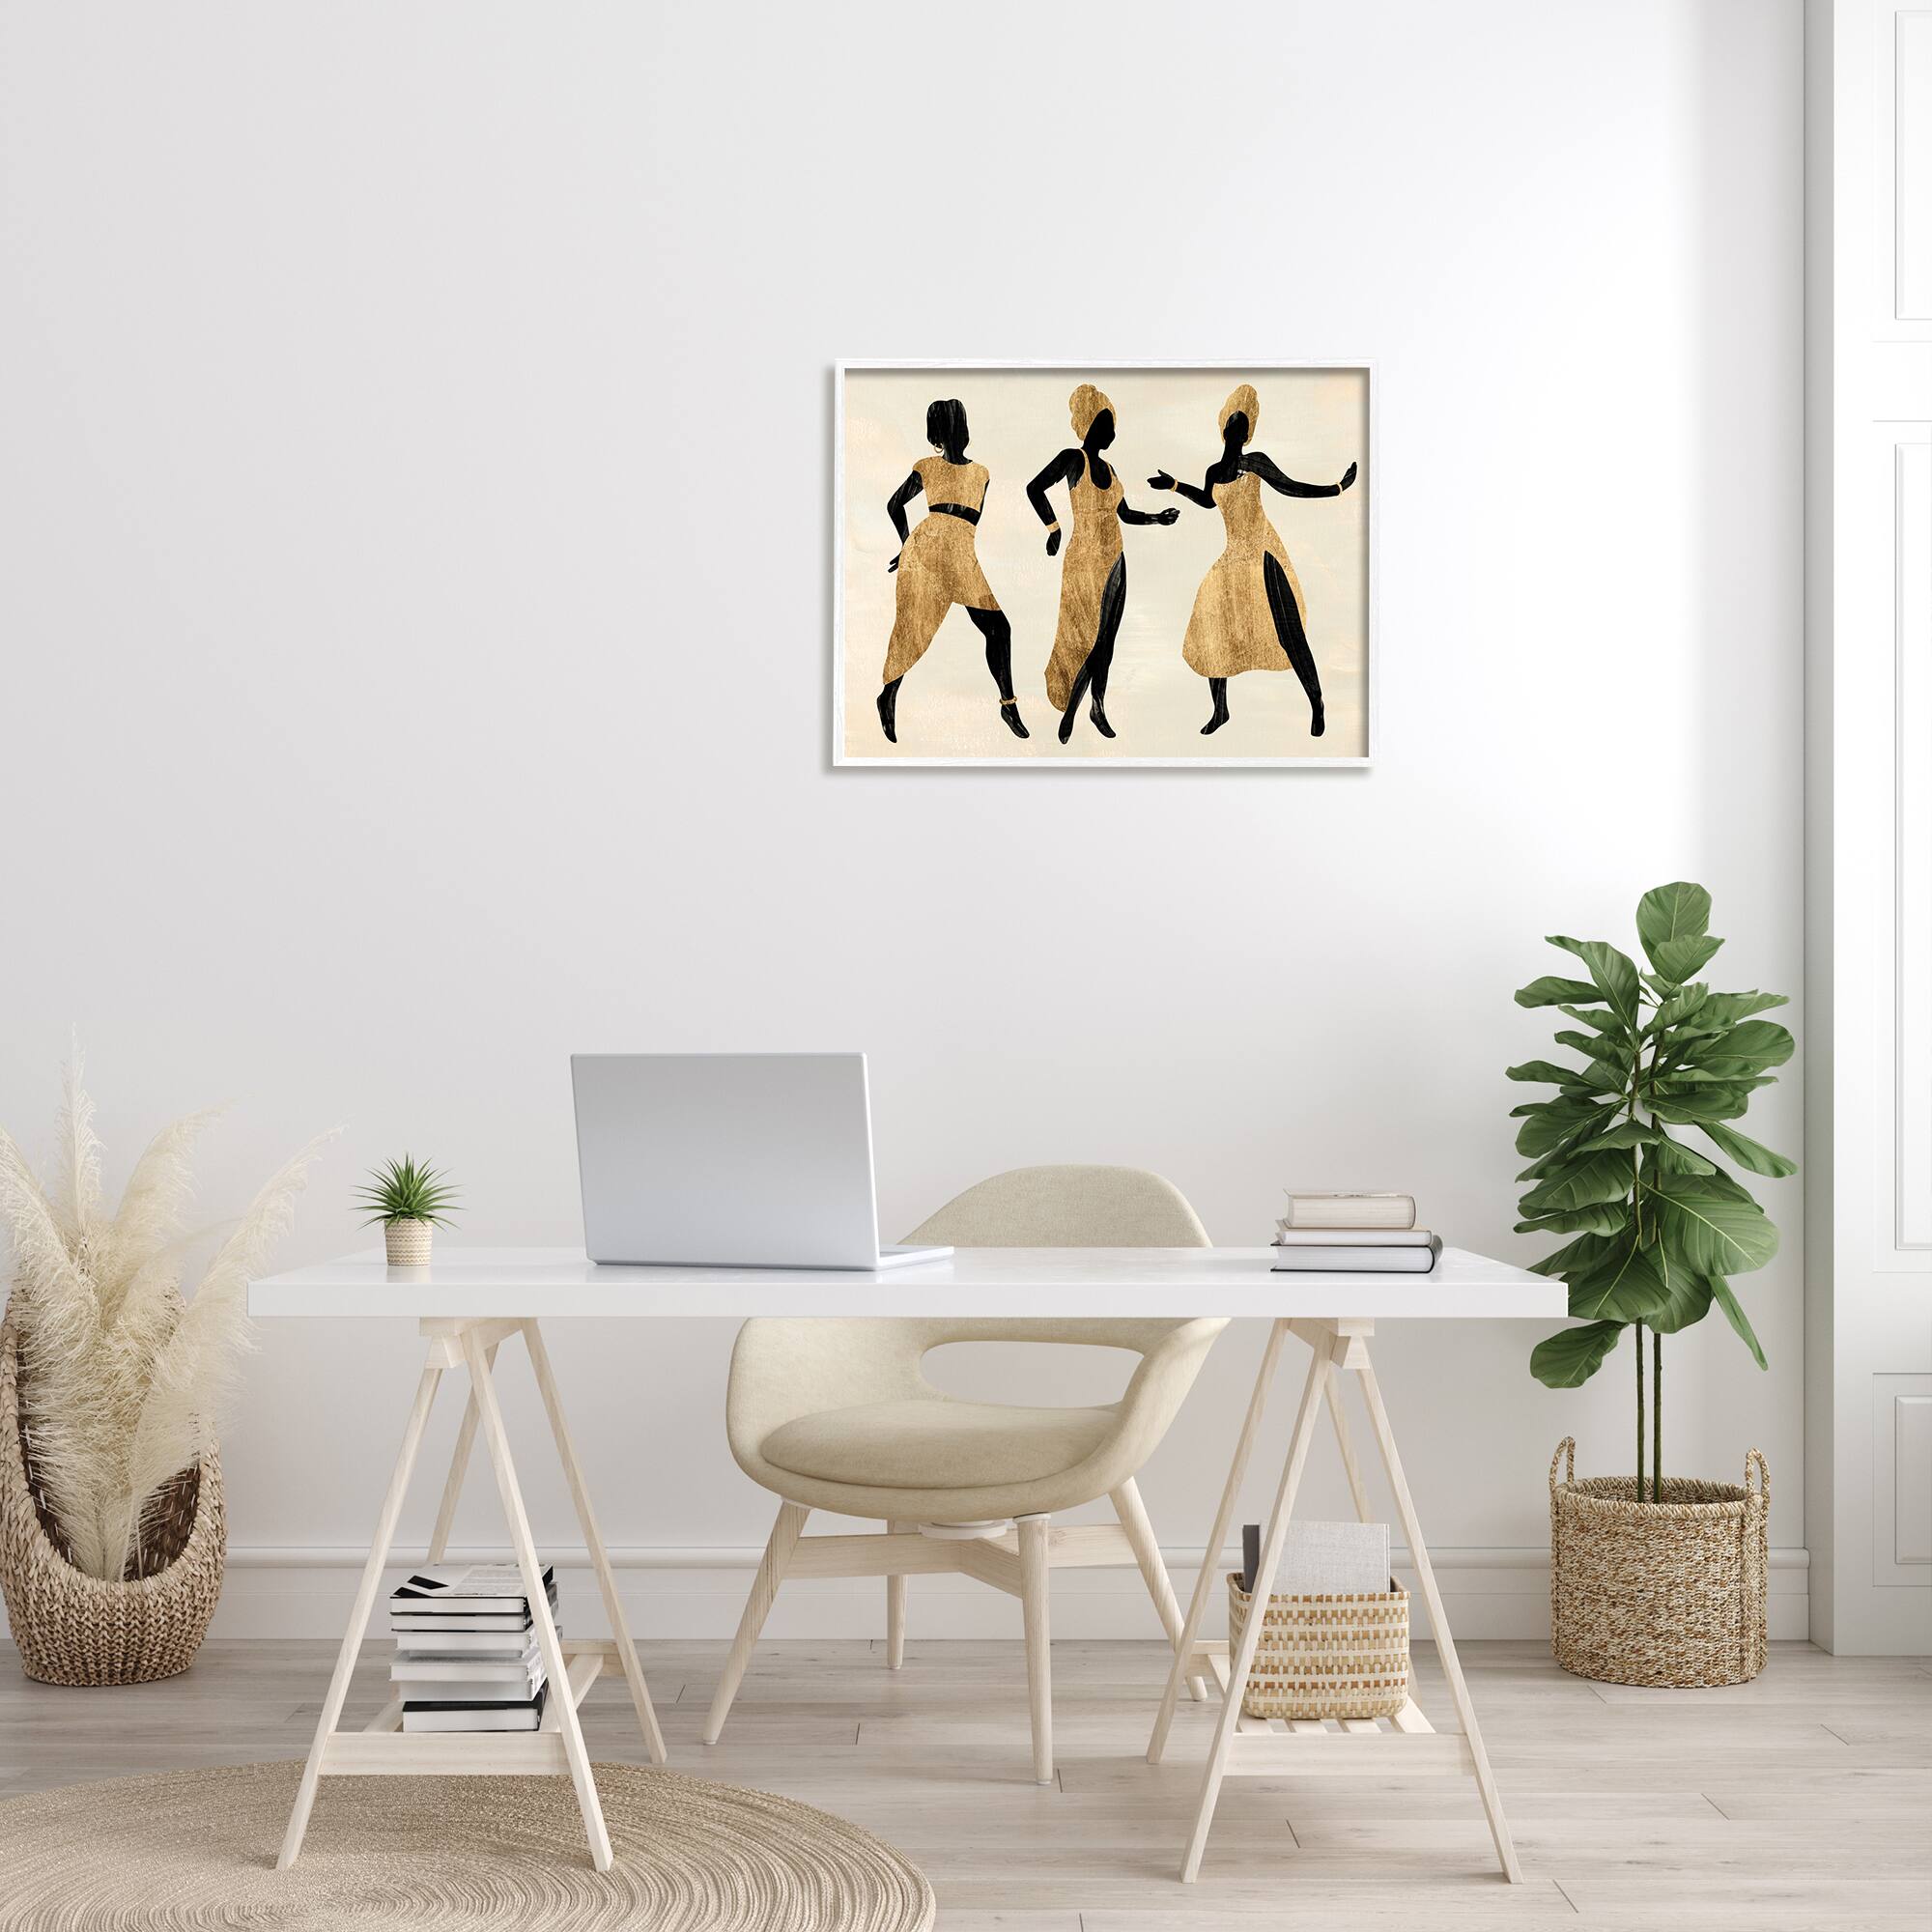 Stupell Industries Powerful Women Dancing  African Glam Fashion Black Beige in White Frame Wall Art